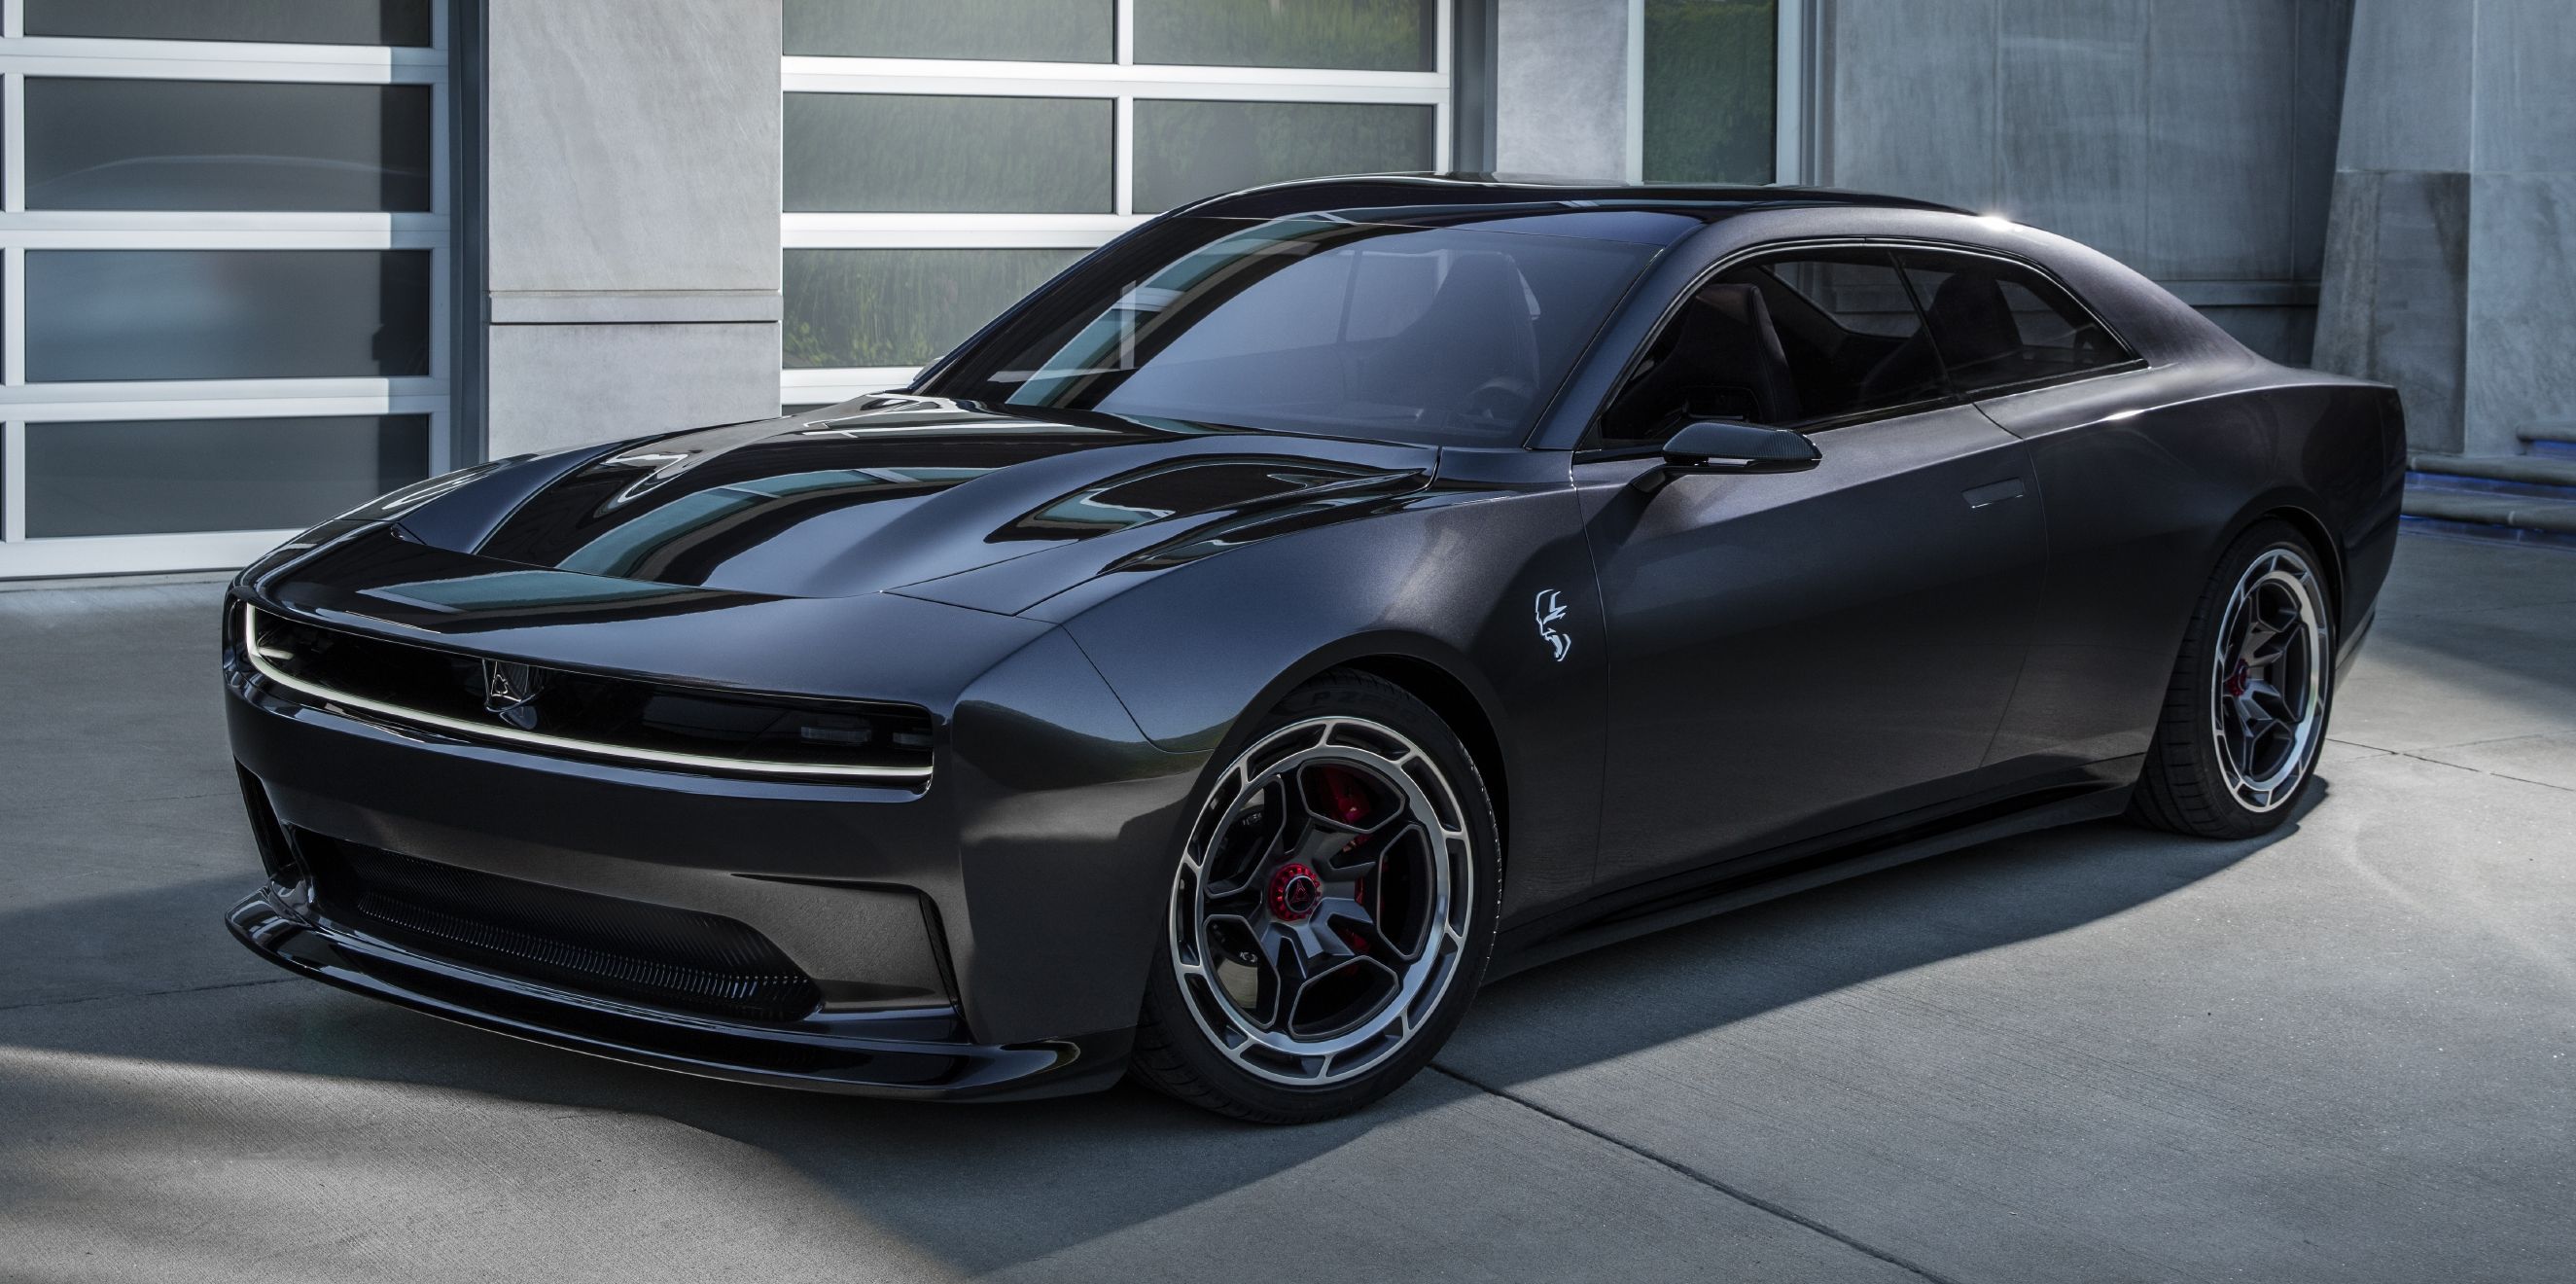 Dodge Charger Daytona SRT Concept Is an EV With a Hellcat Soundtrack and a Shiftable Transmission